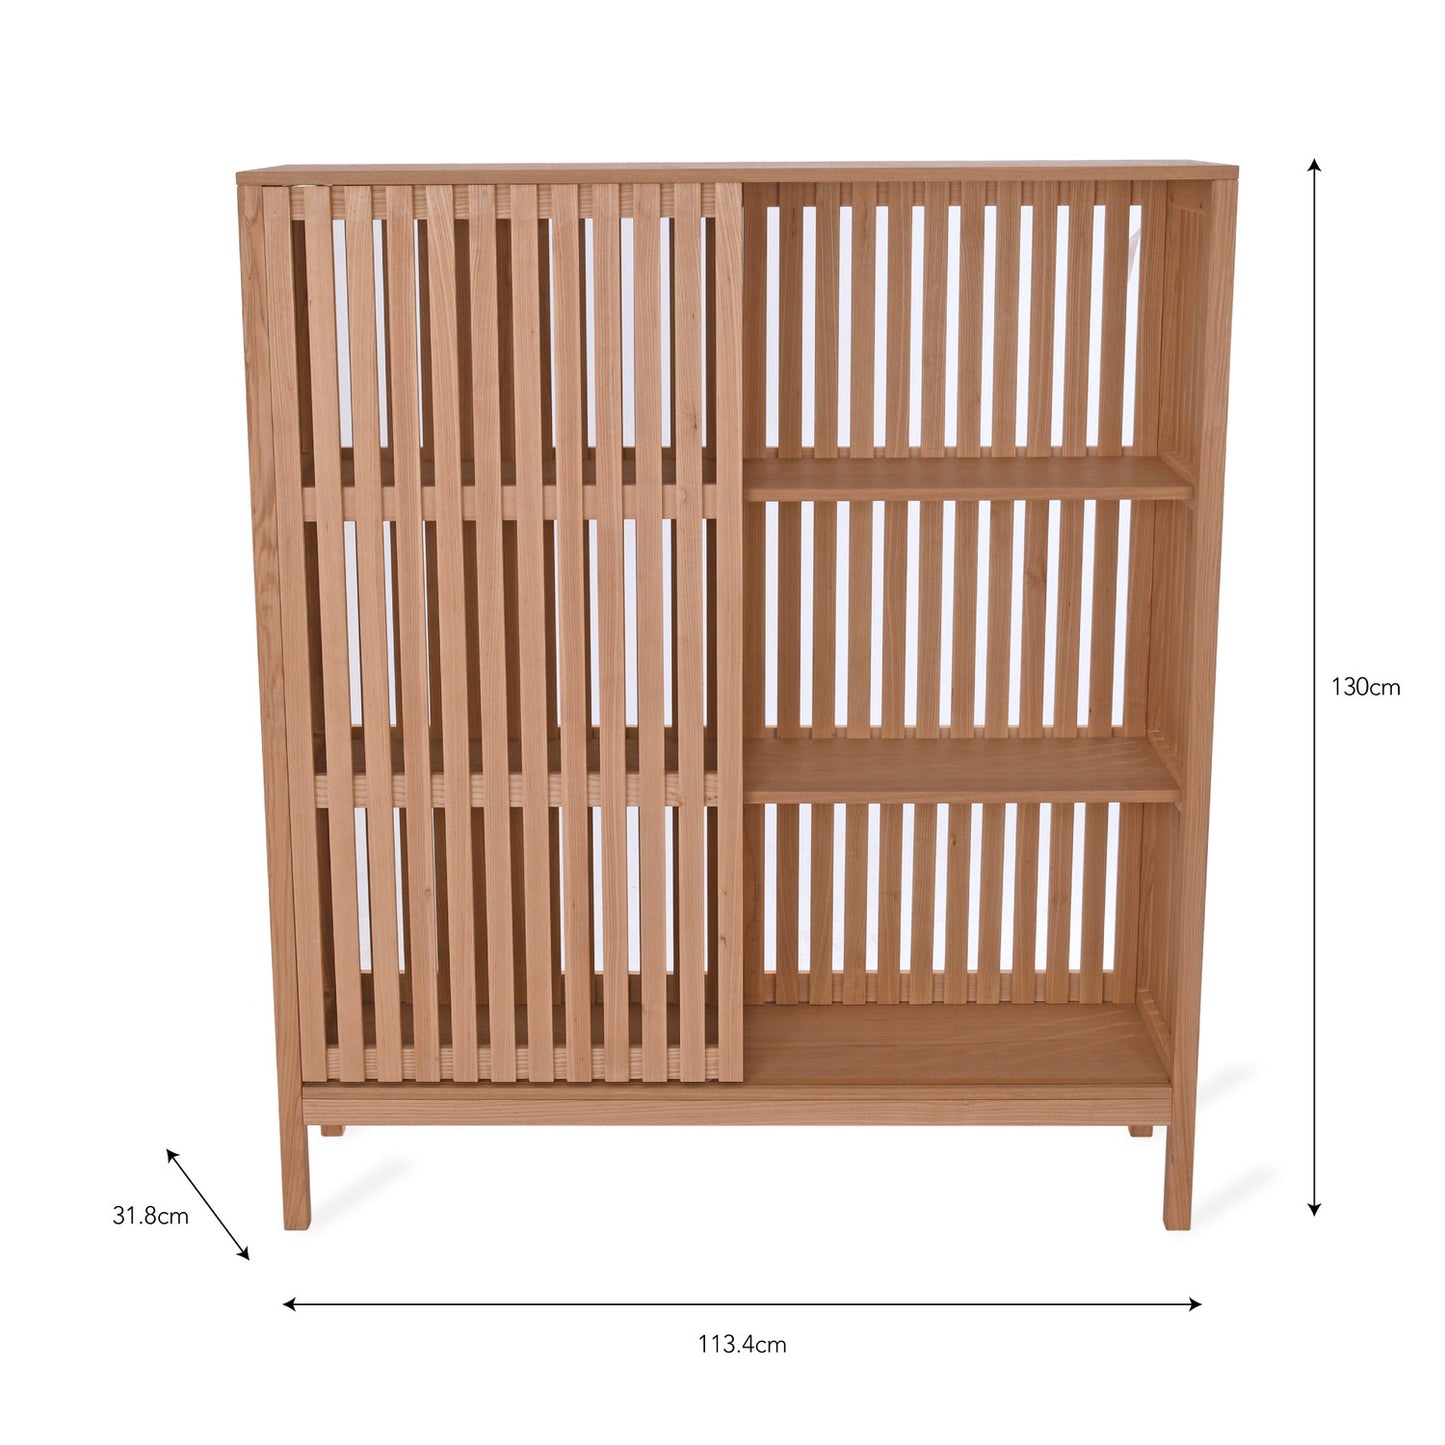 Linear Large Storage Unit by Garden Trading - Ash